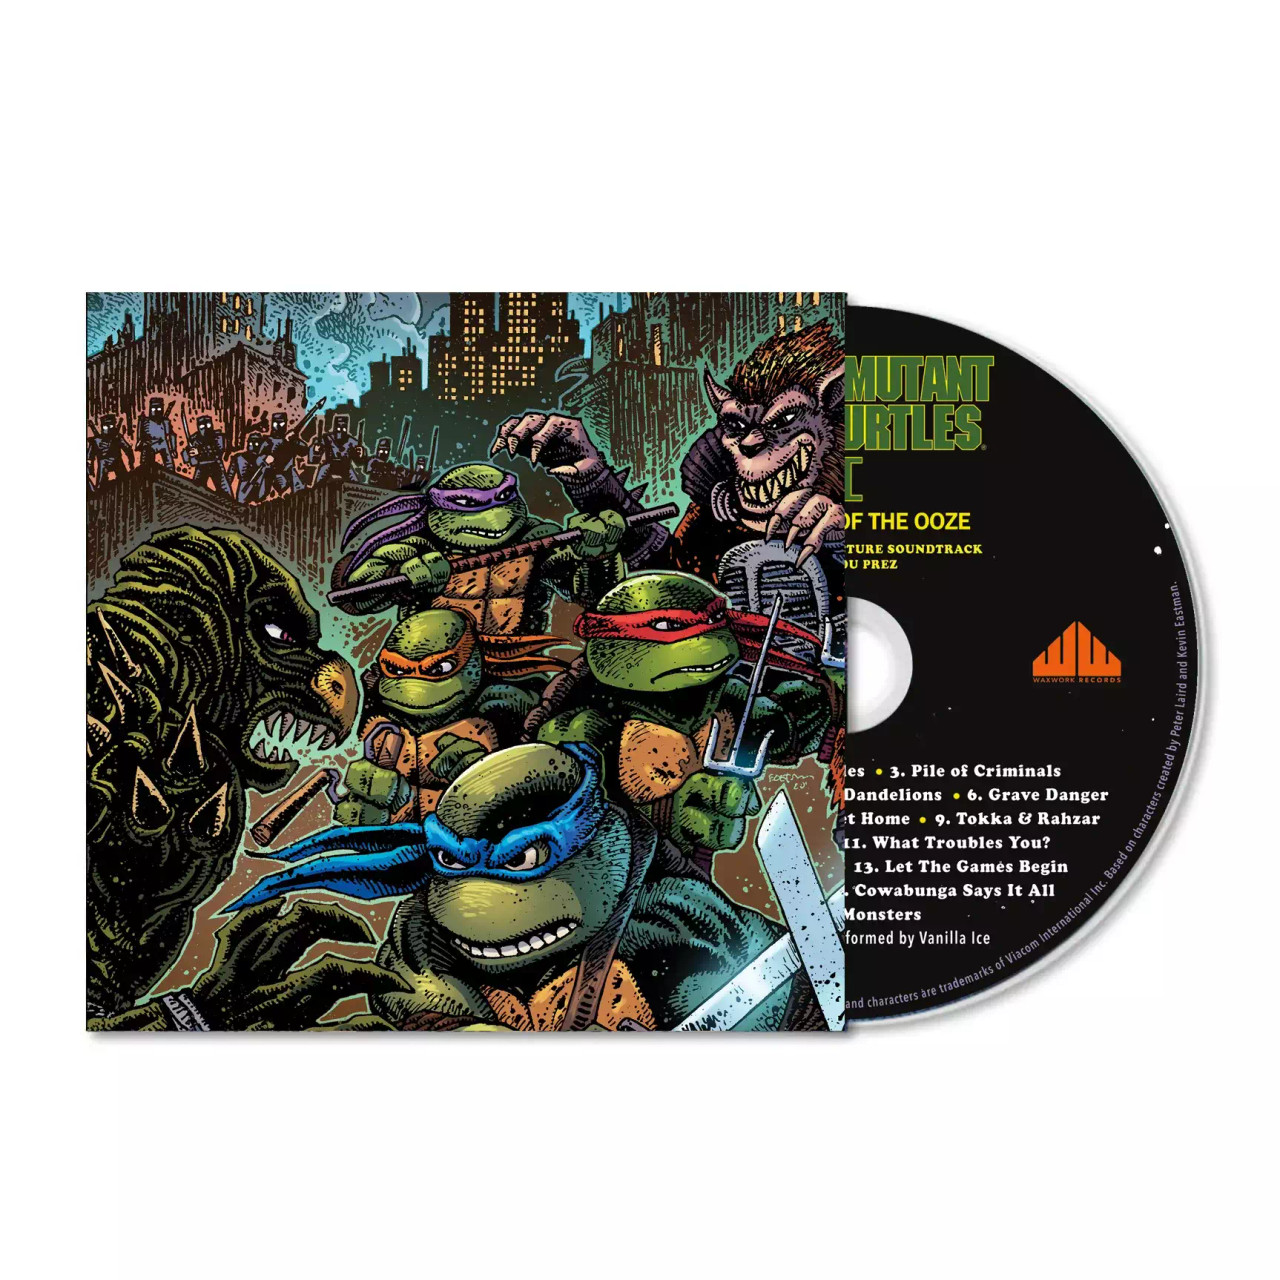 https://cdn11.bigcommerce.com/s-8j9ytfqbd1/images/stencil/1280x1280/products/846/8251/TMNT-II-Secret-of-the-Ooze-SOTO-CD_3977__71285.1687293981.jpg?c=1?imbypass=on